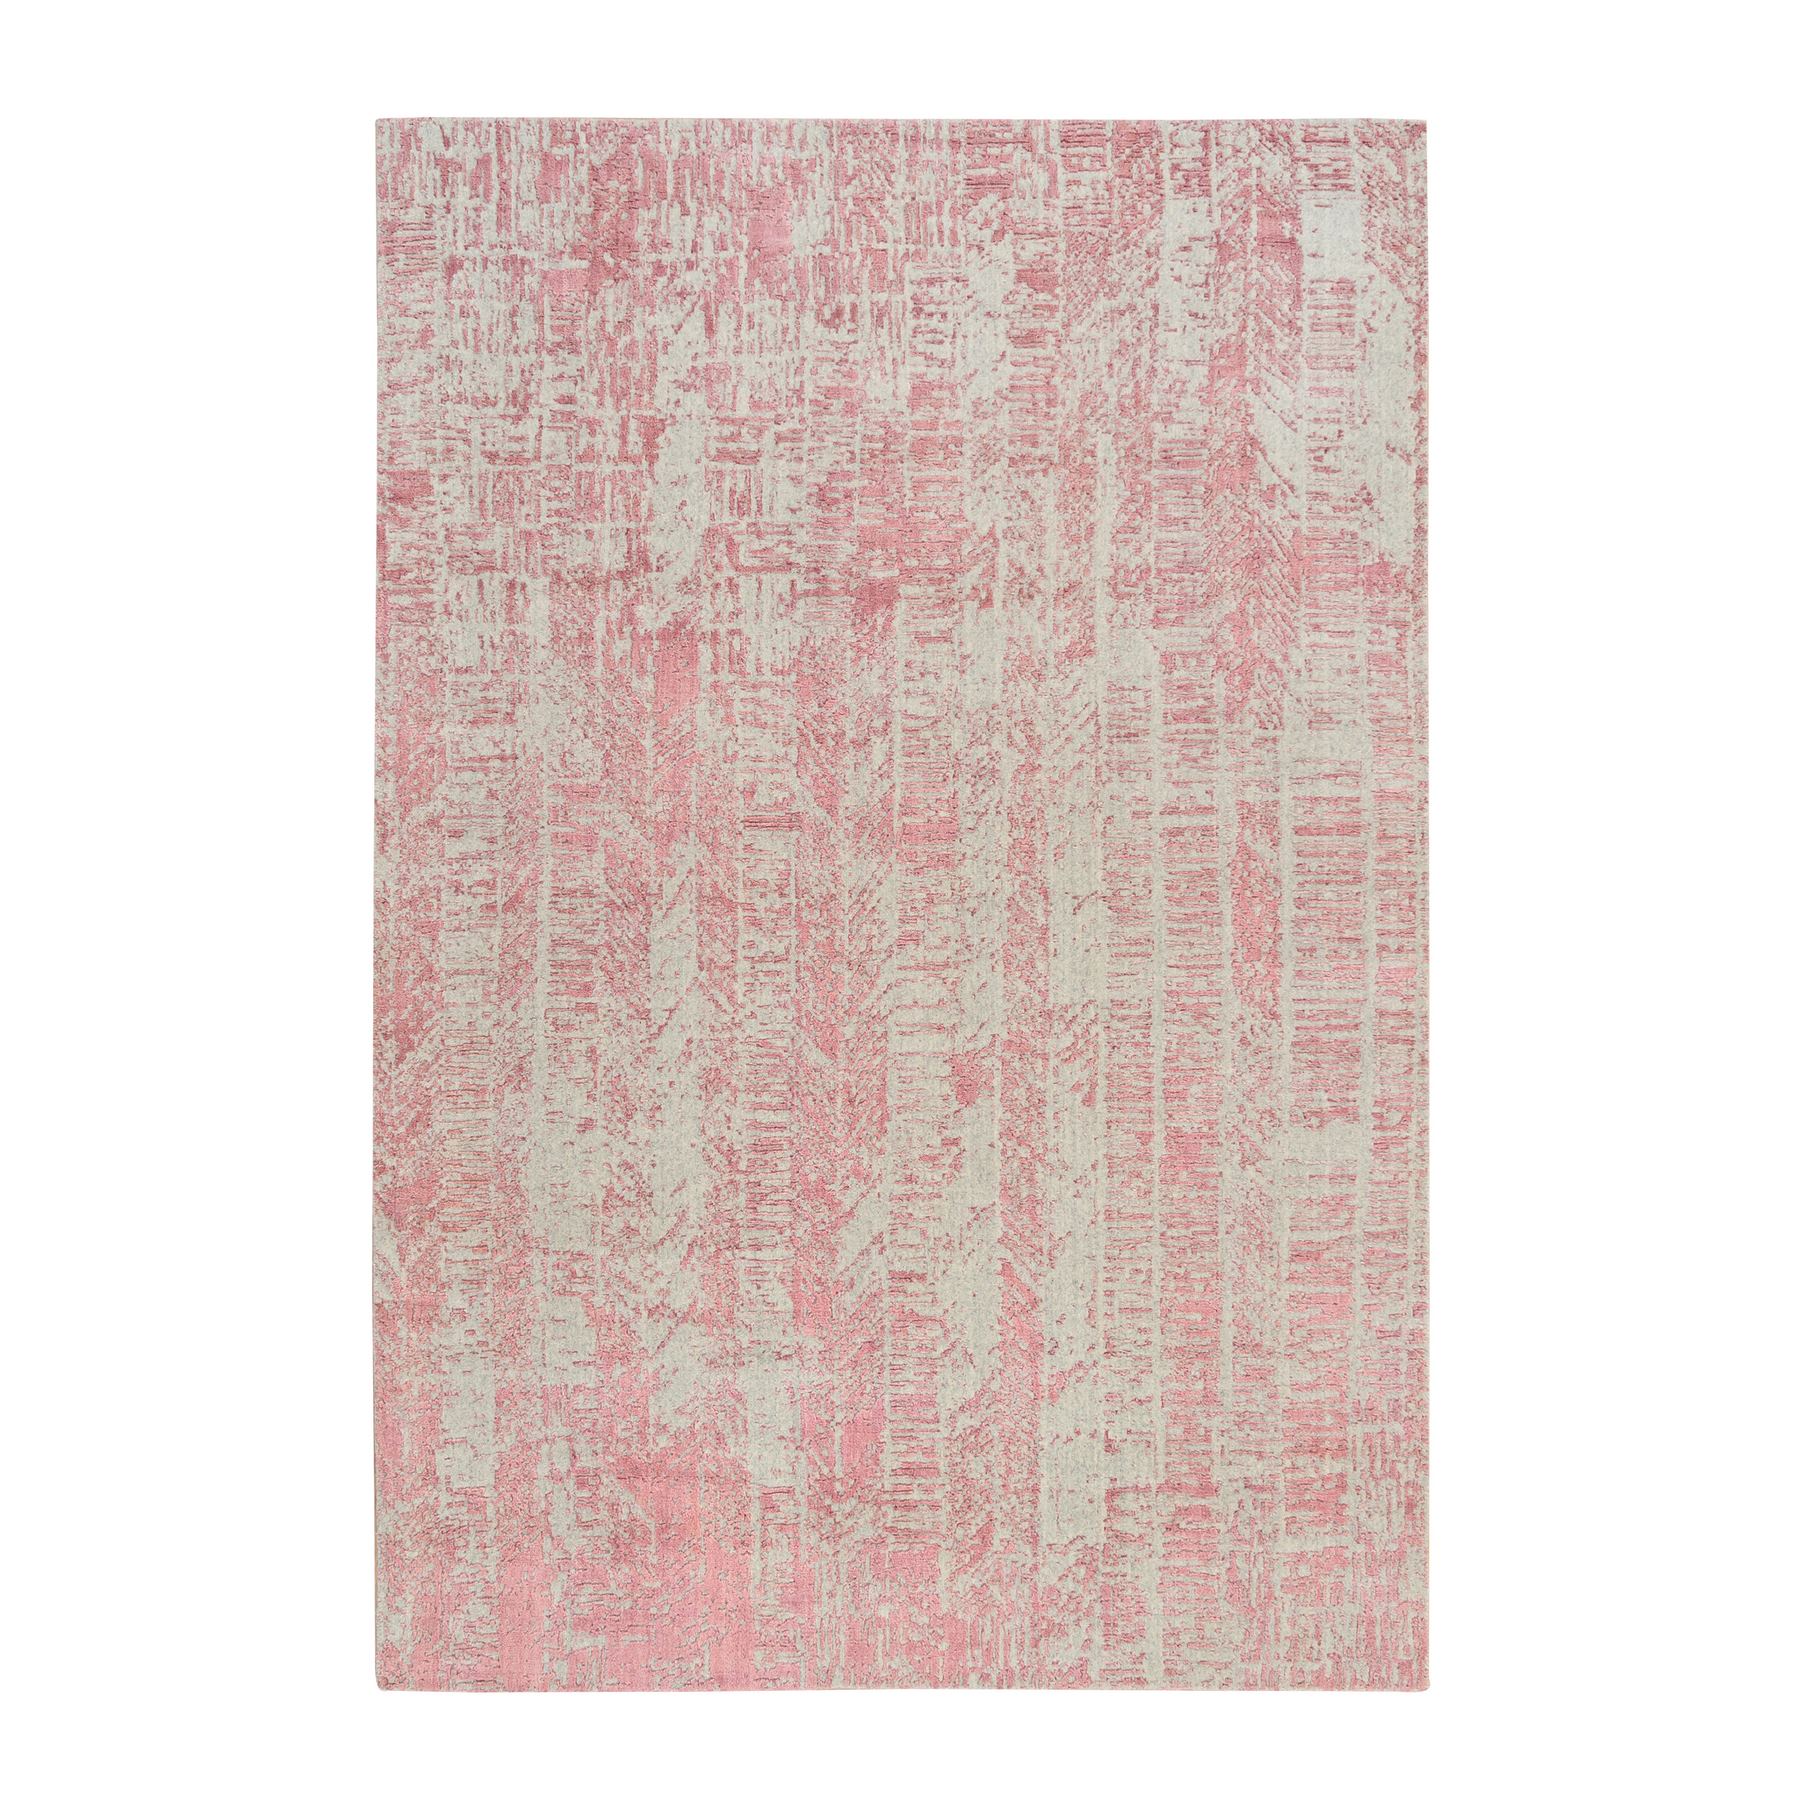 Pace lining fabric in pink - Kangaskauppa Ompelimo Riitta Oy